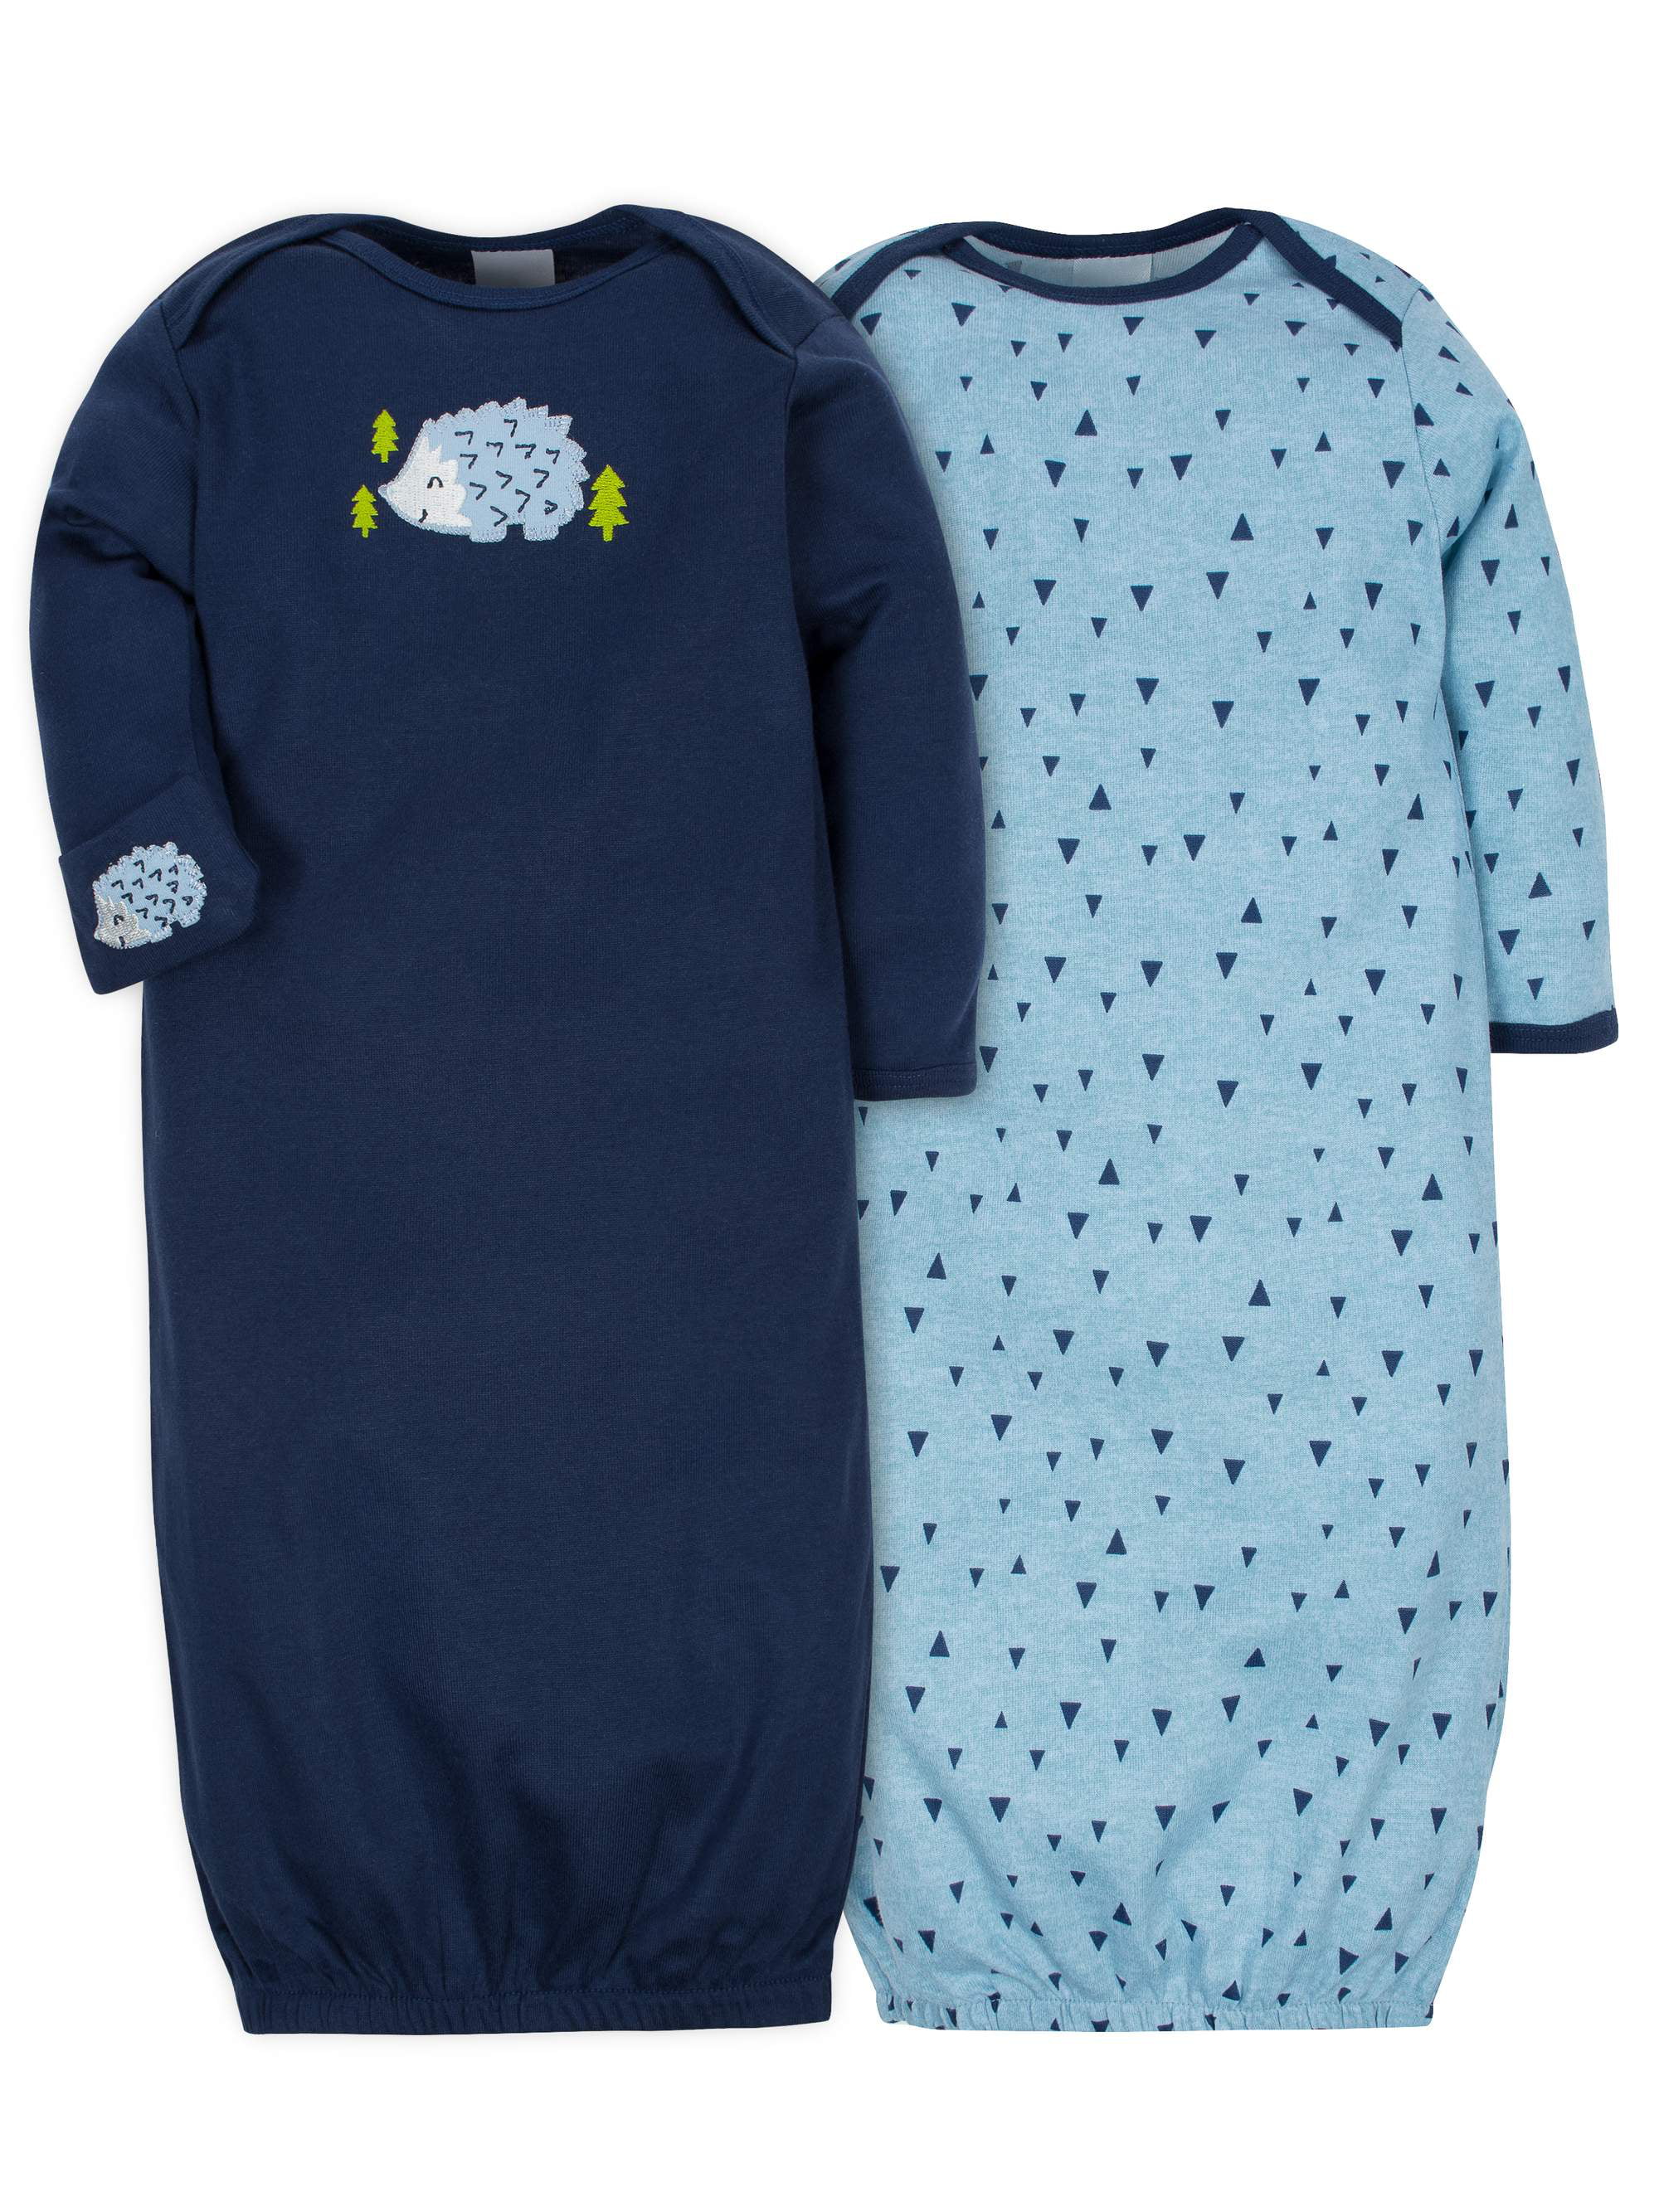 Space 0-6 Months Gerber Baby Boys 2 Pack Gown